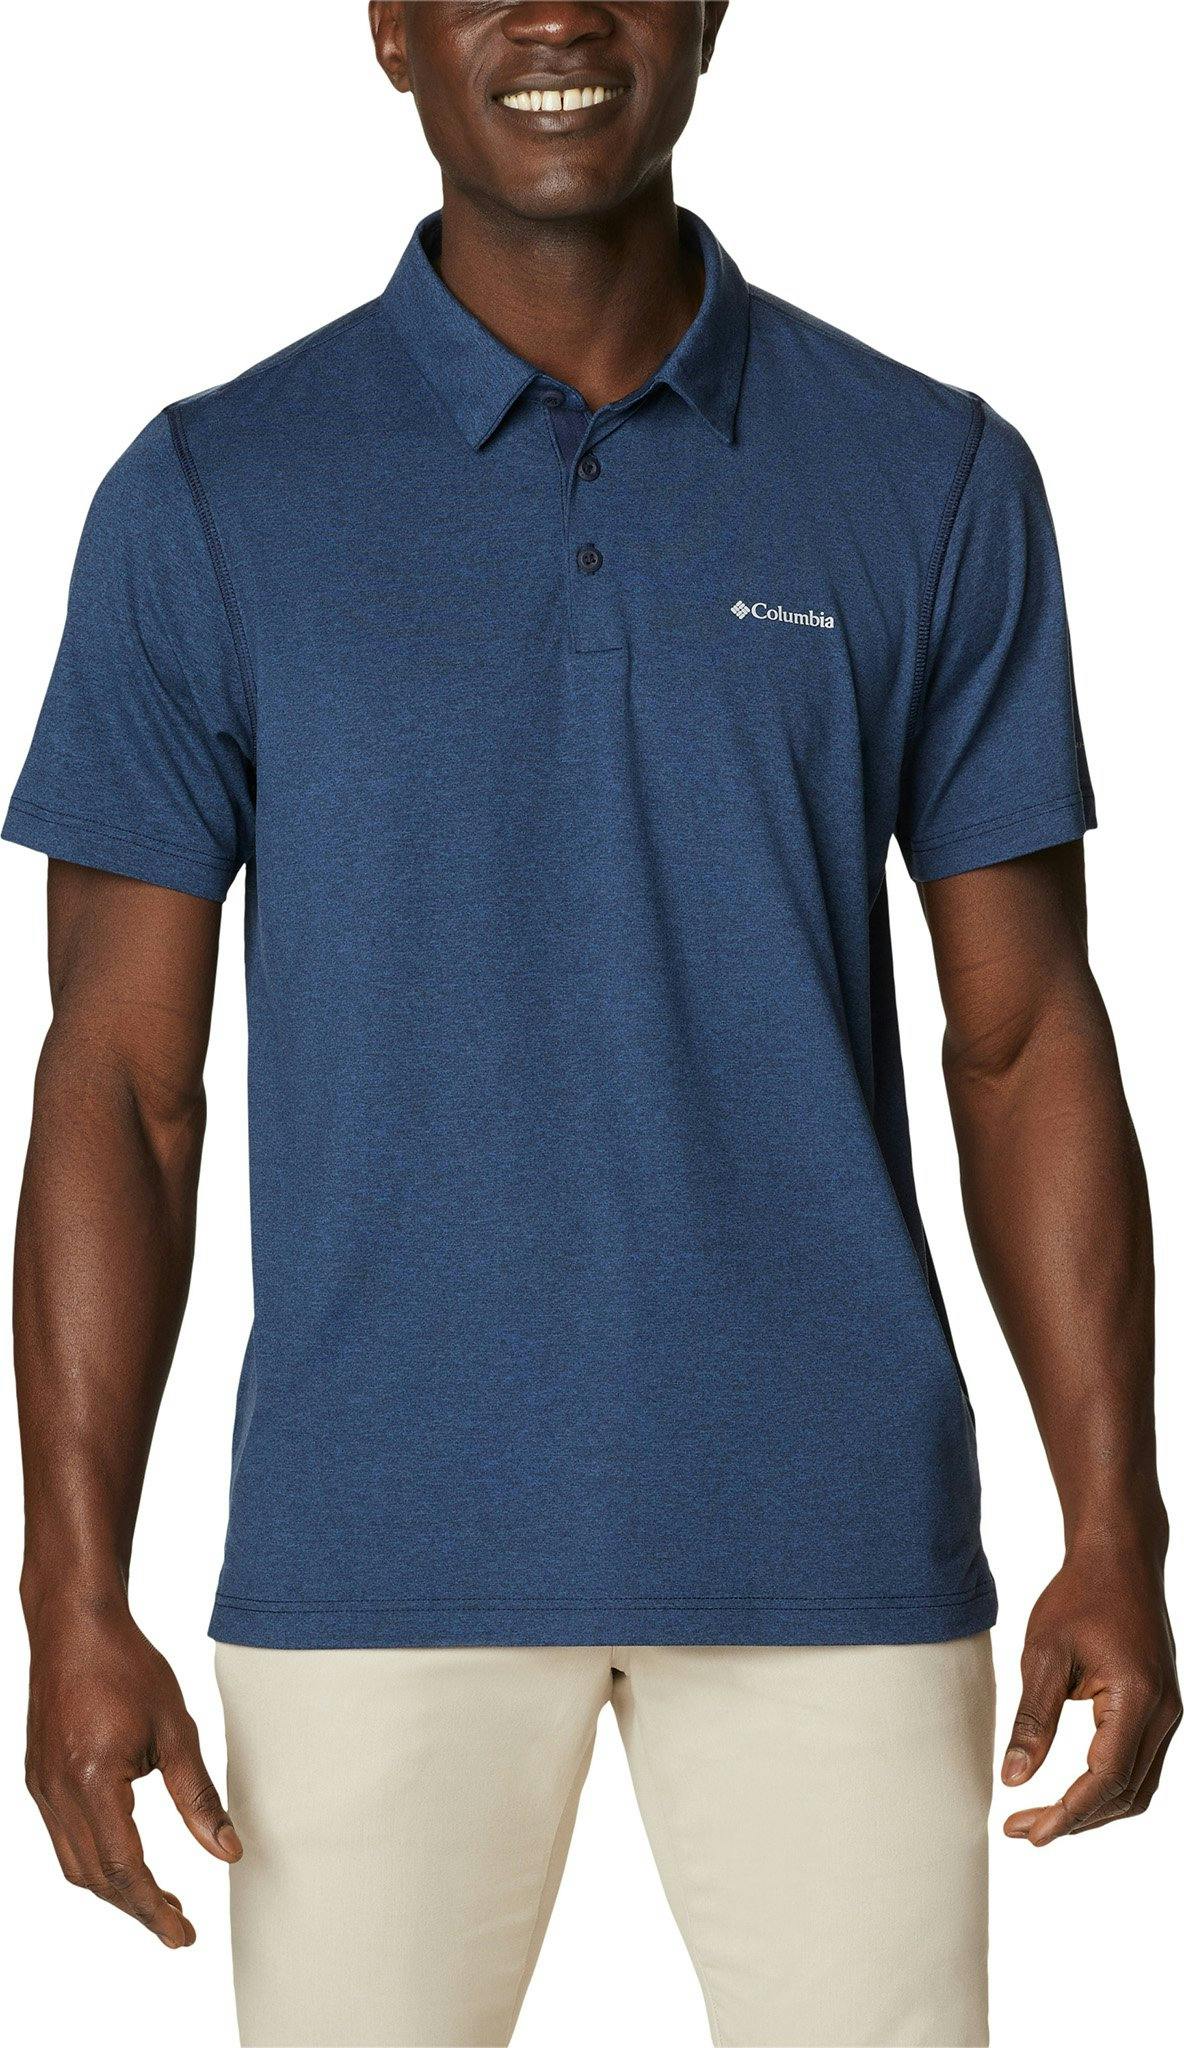 Product image for Tech Trail Polo Shirt - Men's